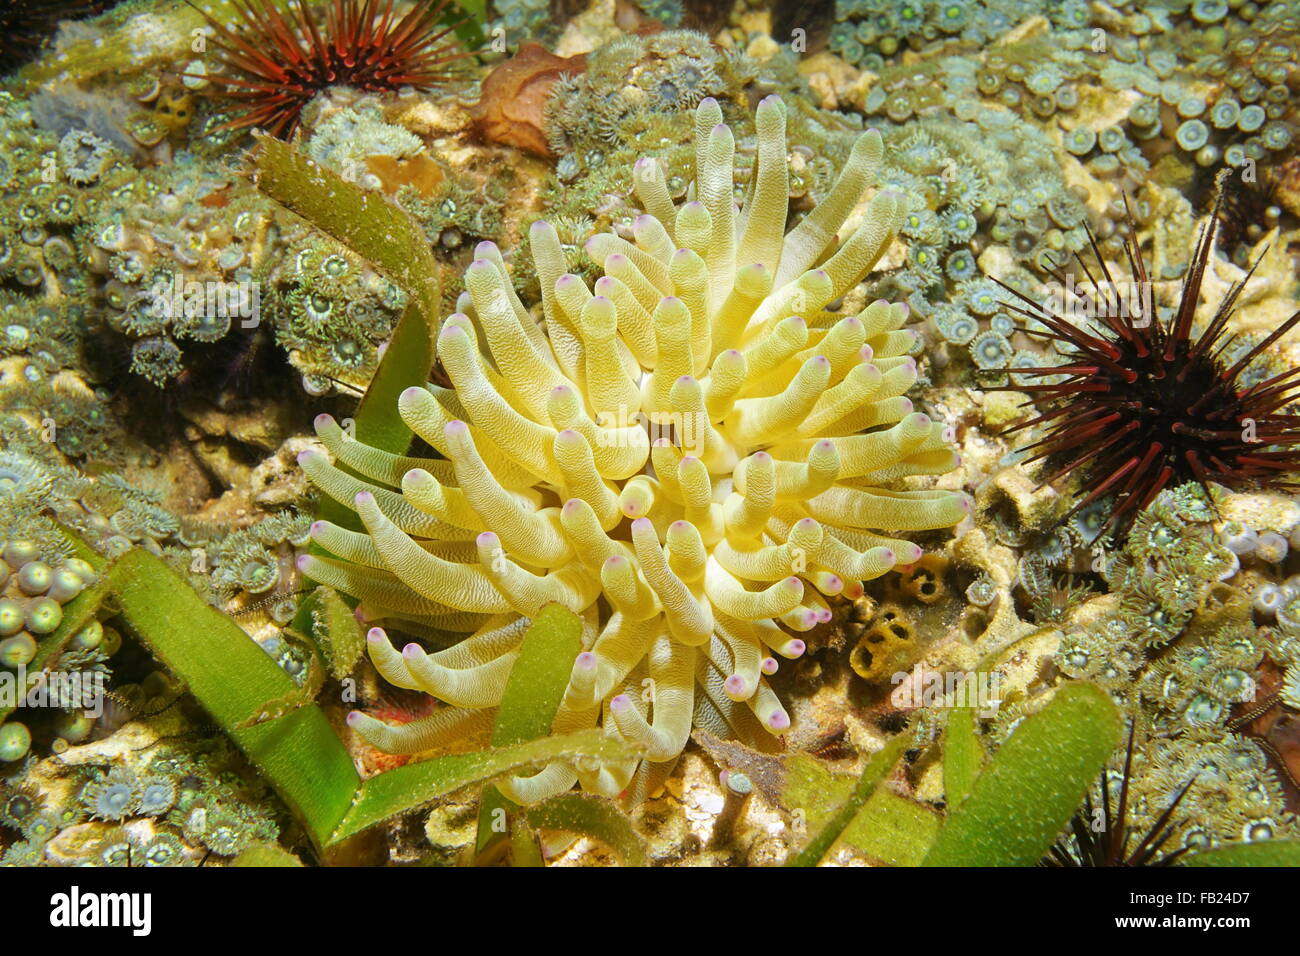 A Condy anemone, Condylactis gigantea, on the seabed in the Caribbean sea, Central America, Panama Stock Photo